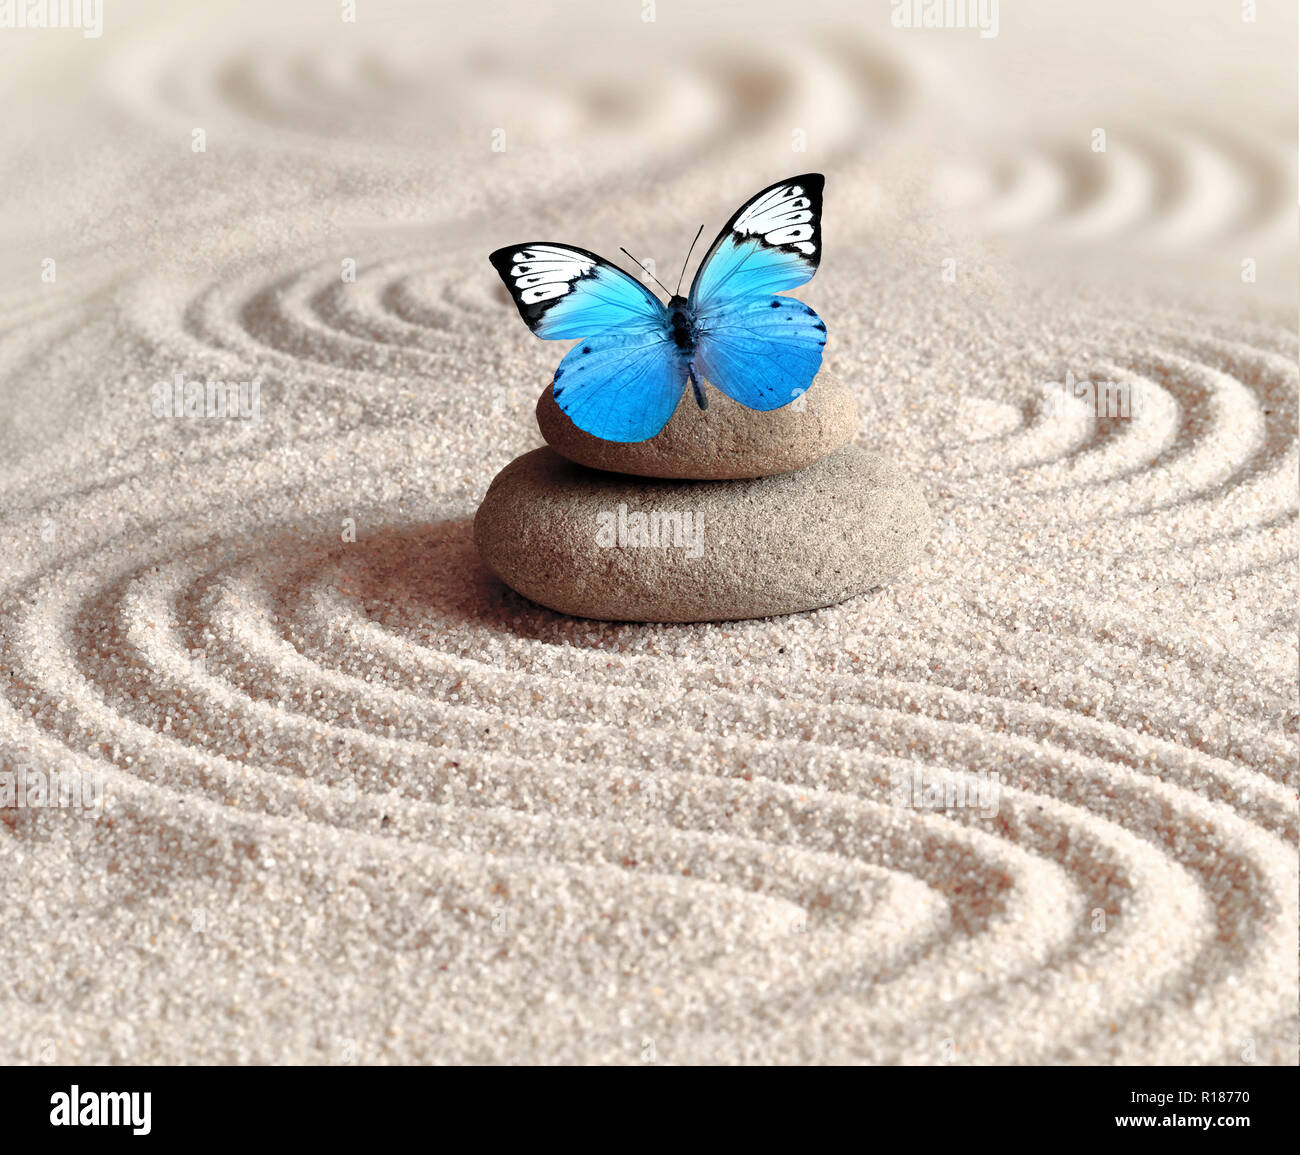 A blue vivid butterfly on a zen stone with circle patterns in the grain sand Stock Photo